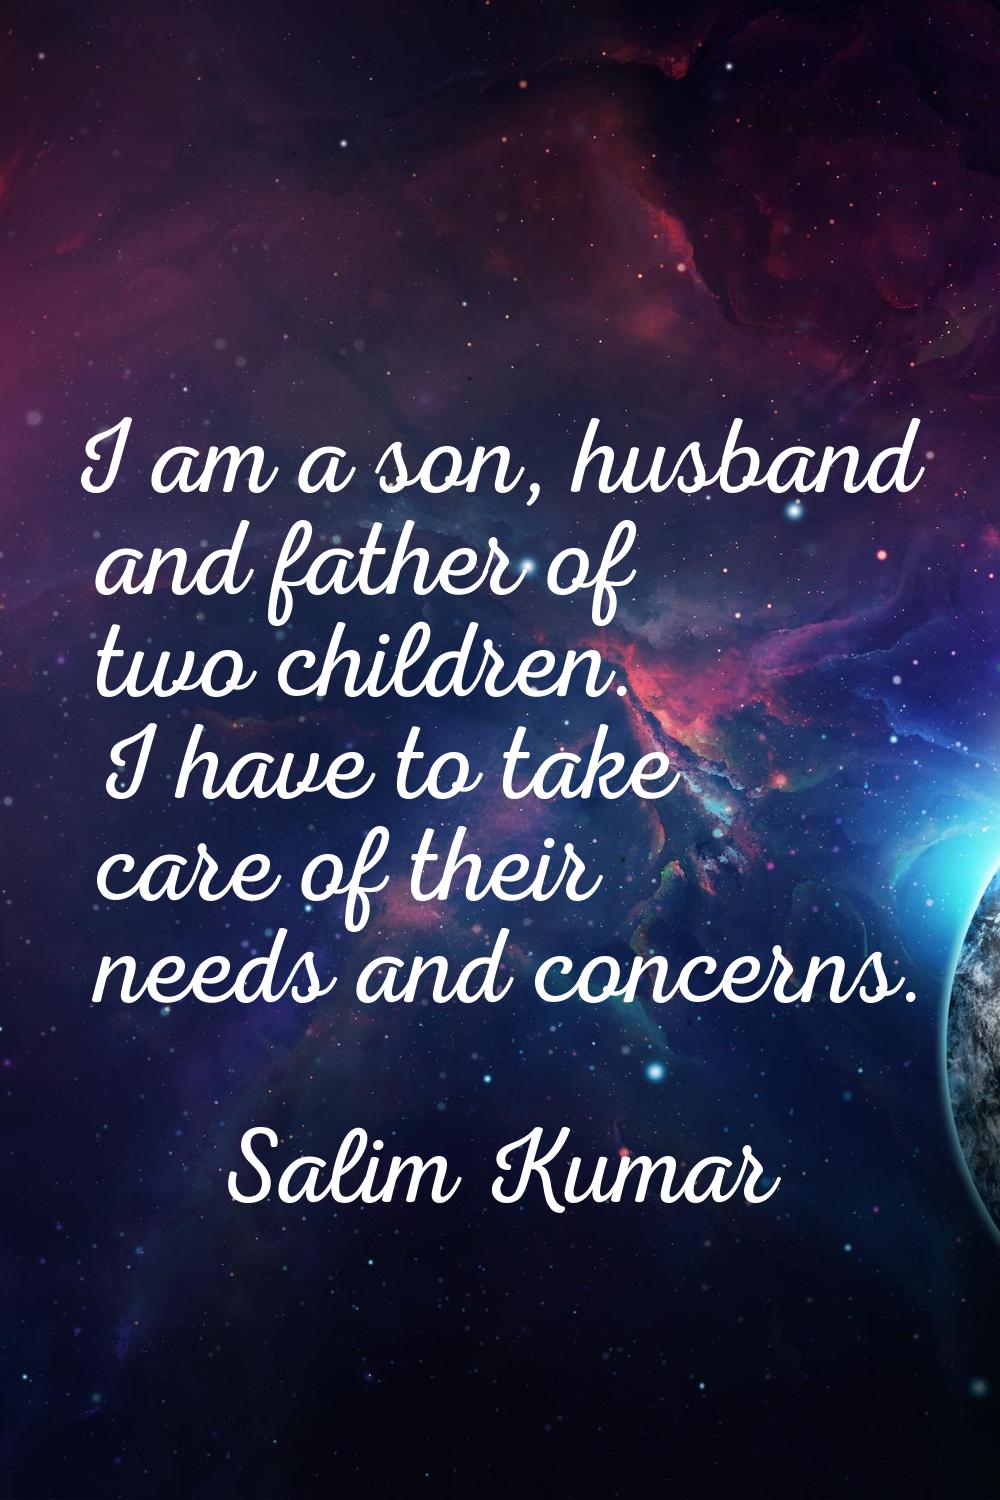 I am a son, husband and father of two children. I have to take care of their needs and concerns.